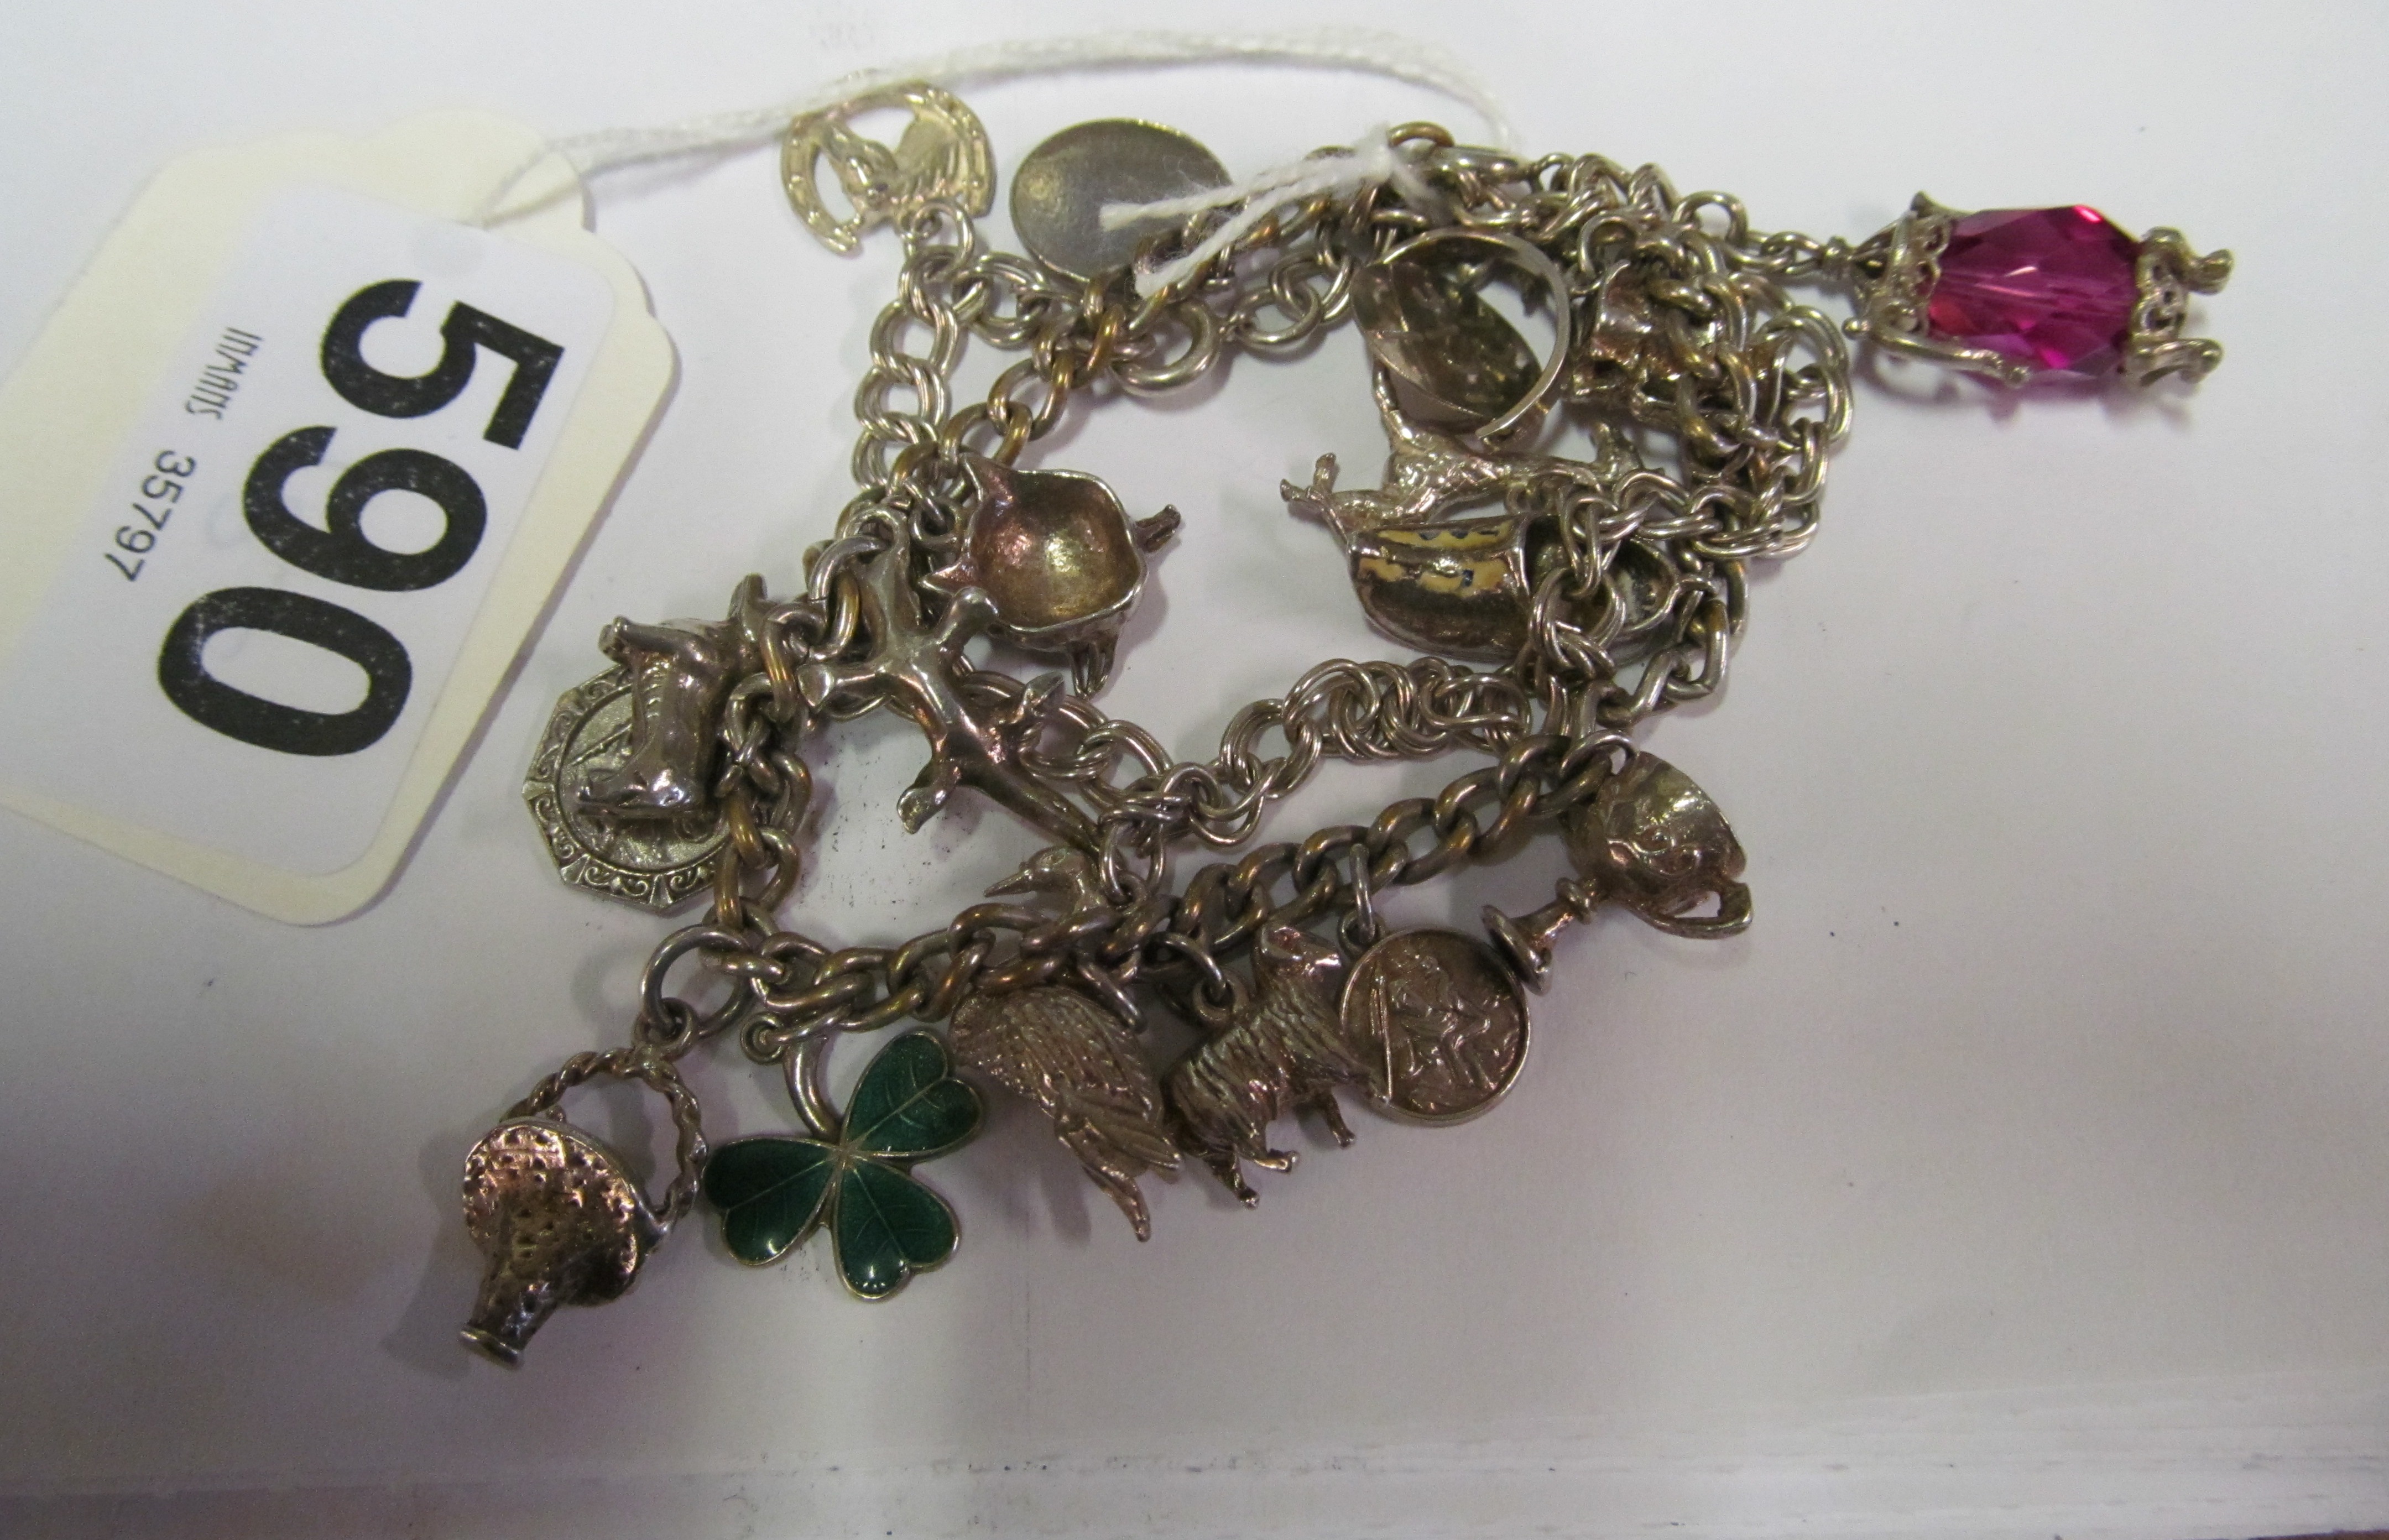 Two silver charm bracelets and charms